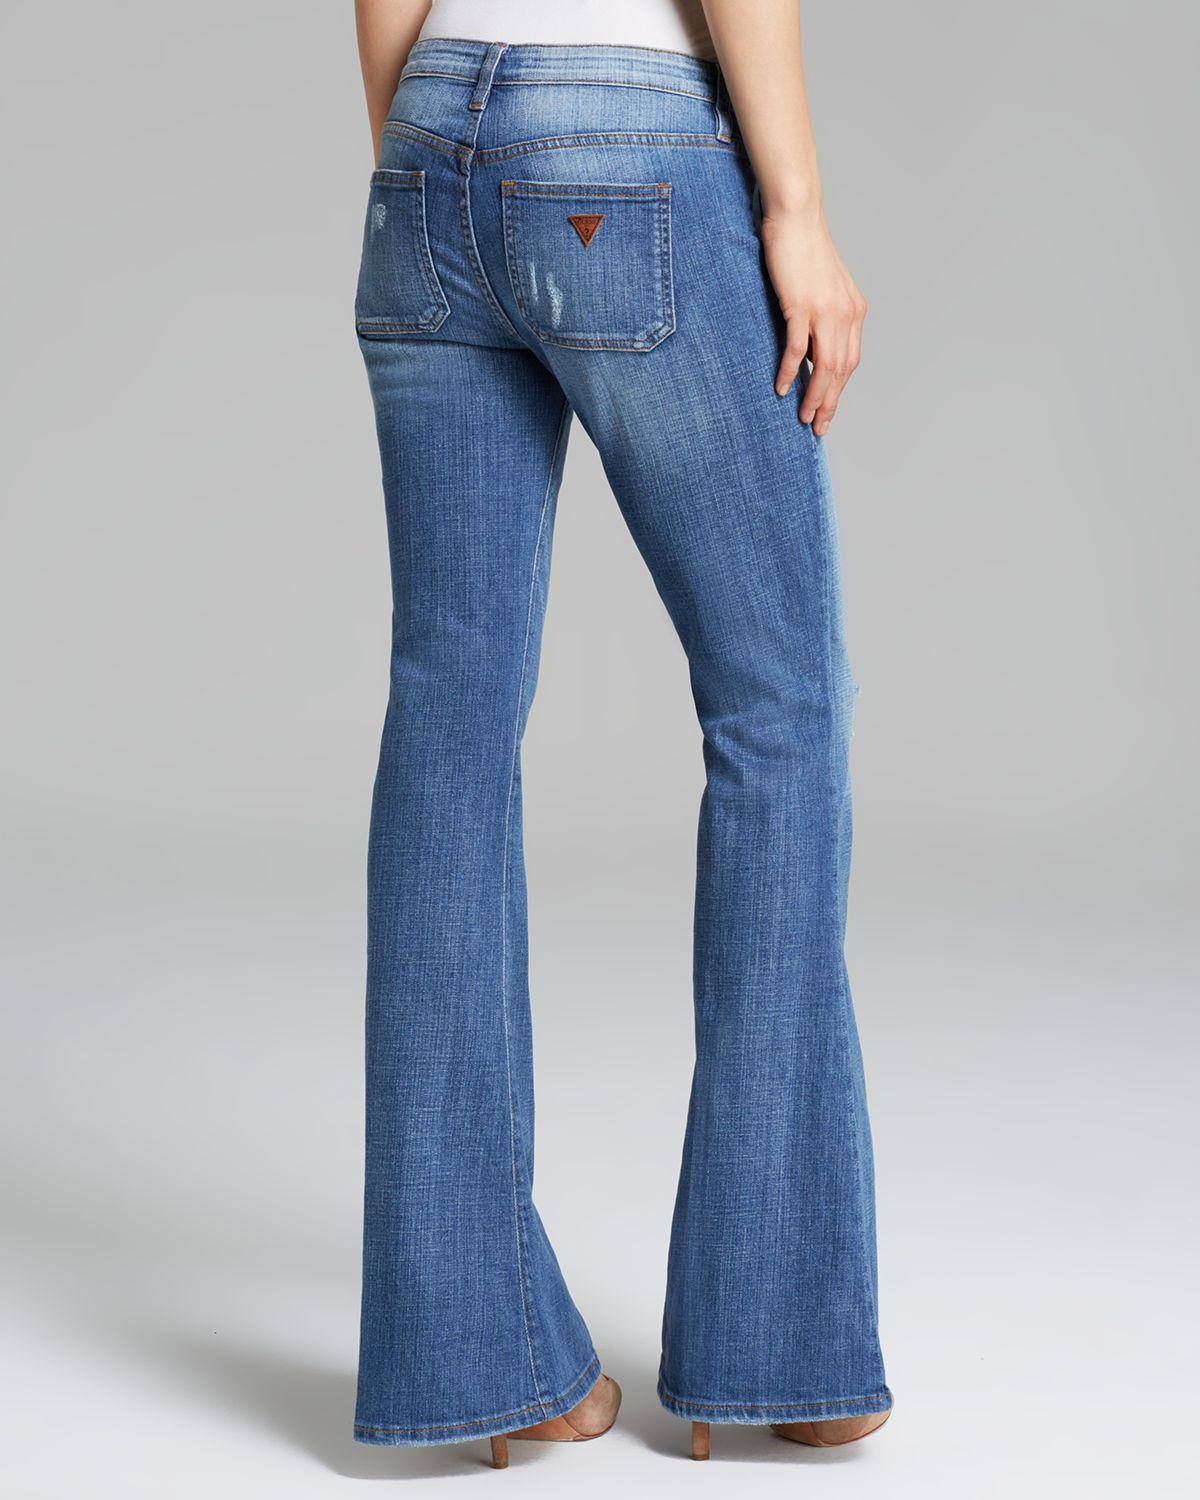 Guess Jeans 70s Flare in Rossen Wash in Blue | Lyst